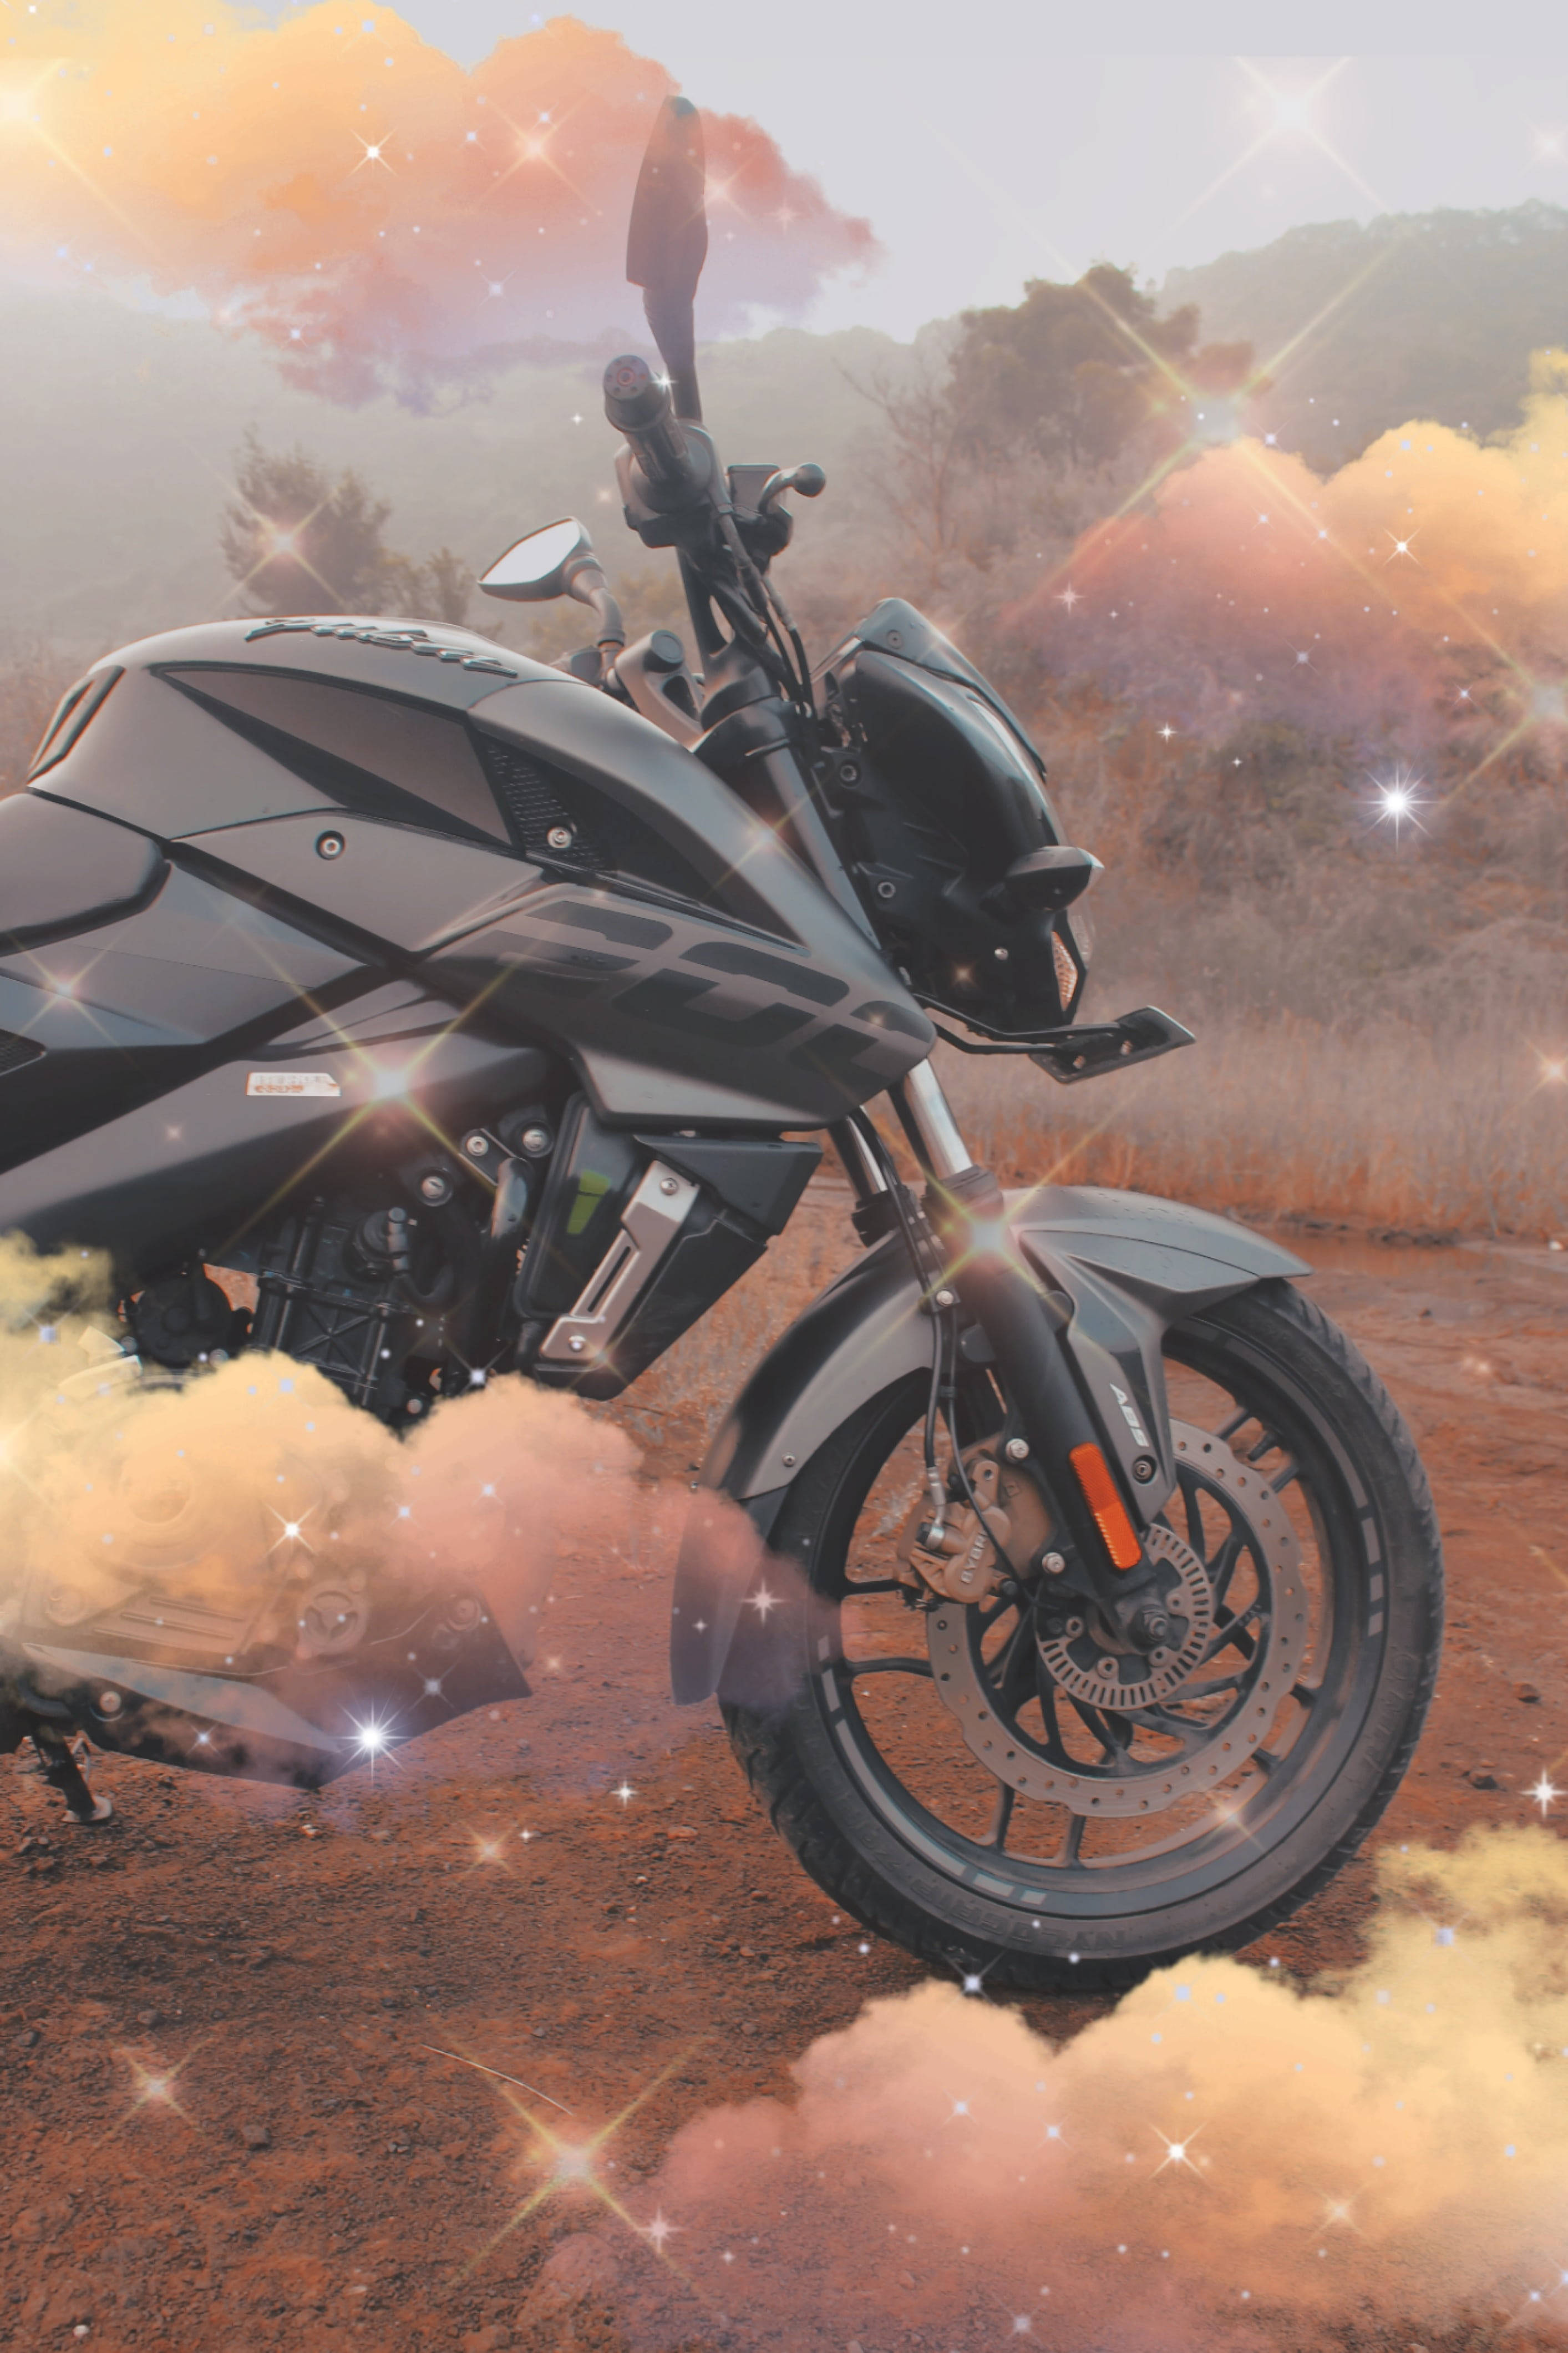 Download Ns 200 Pulsar With Dust And Sparkles Wallpaper 